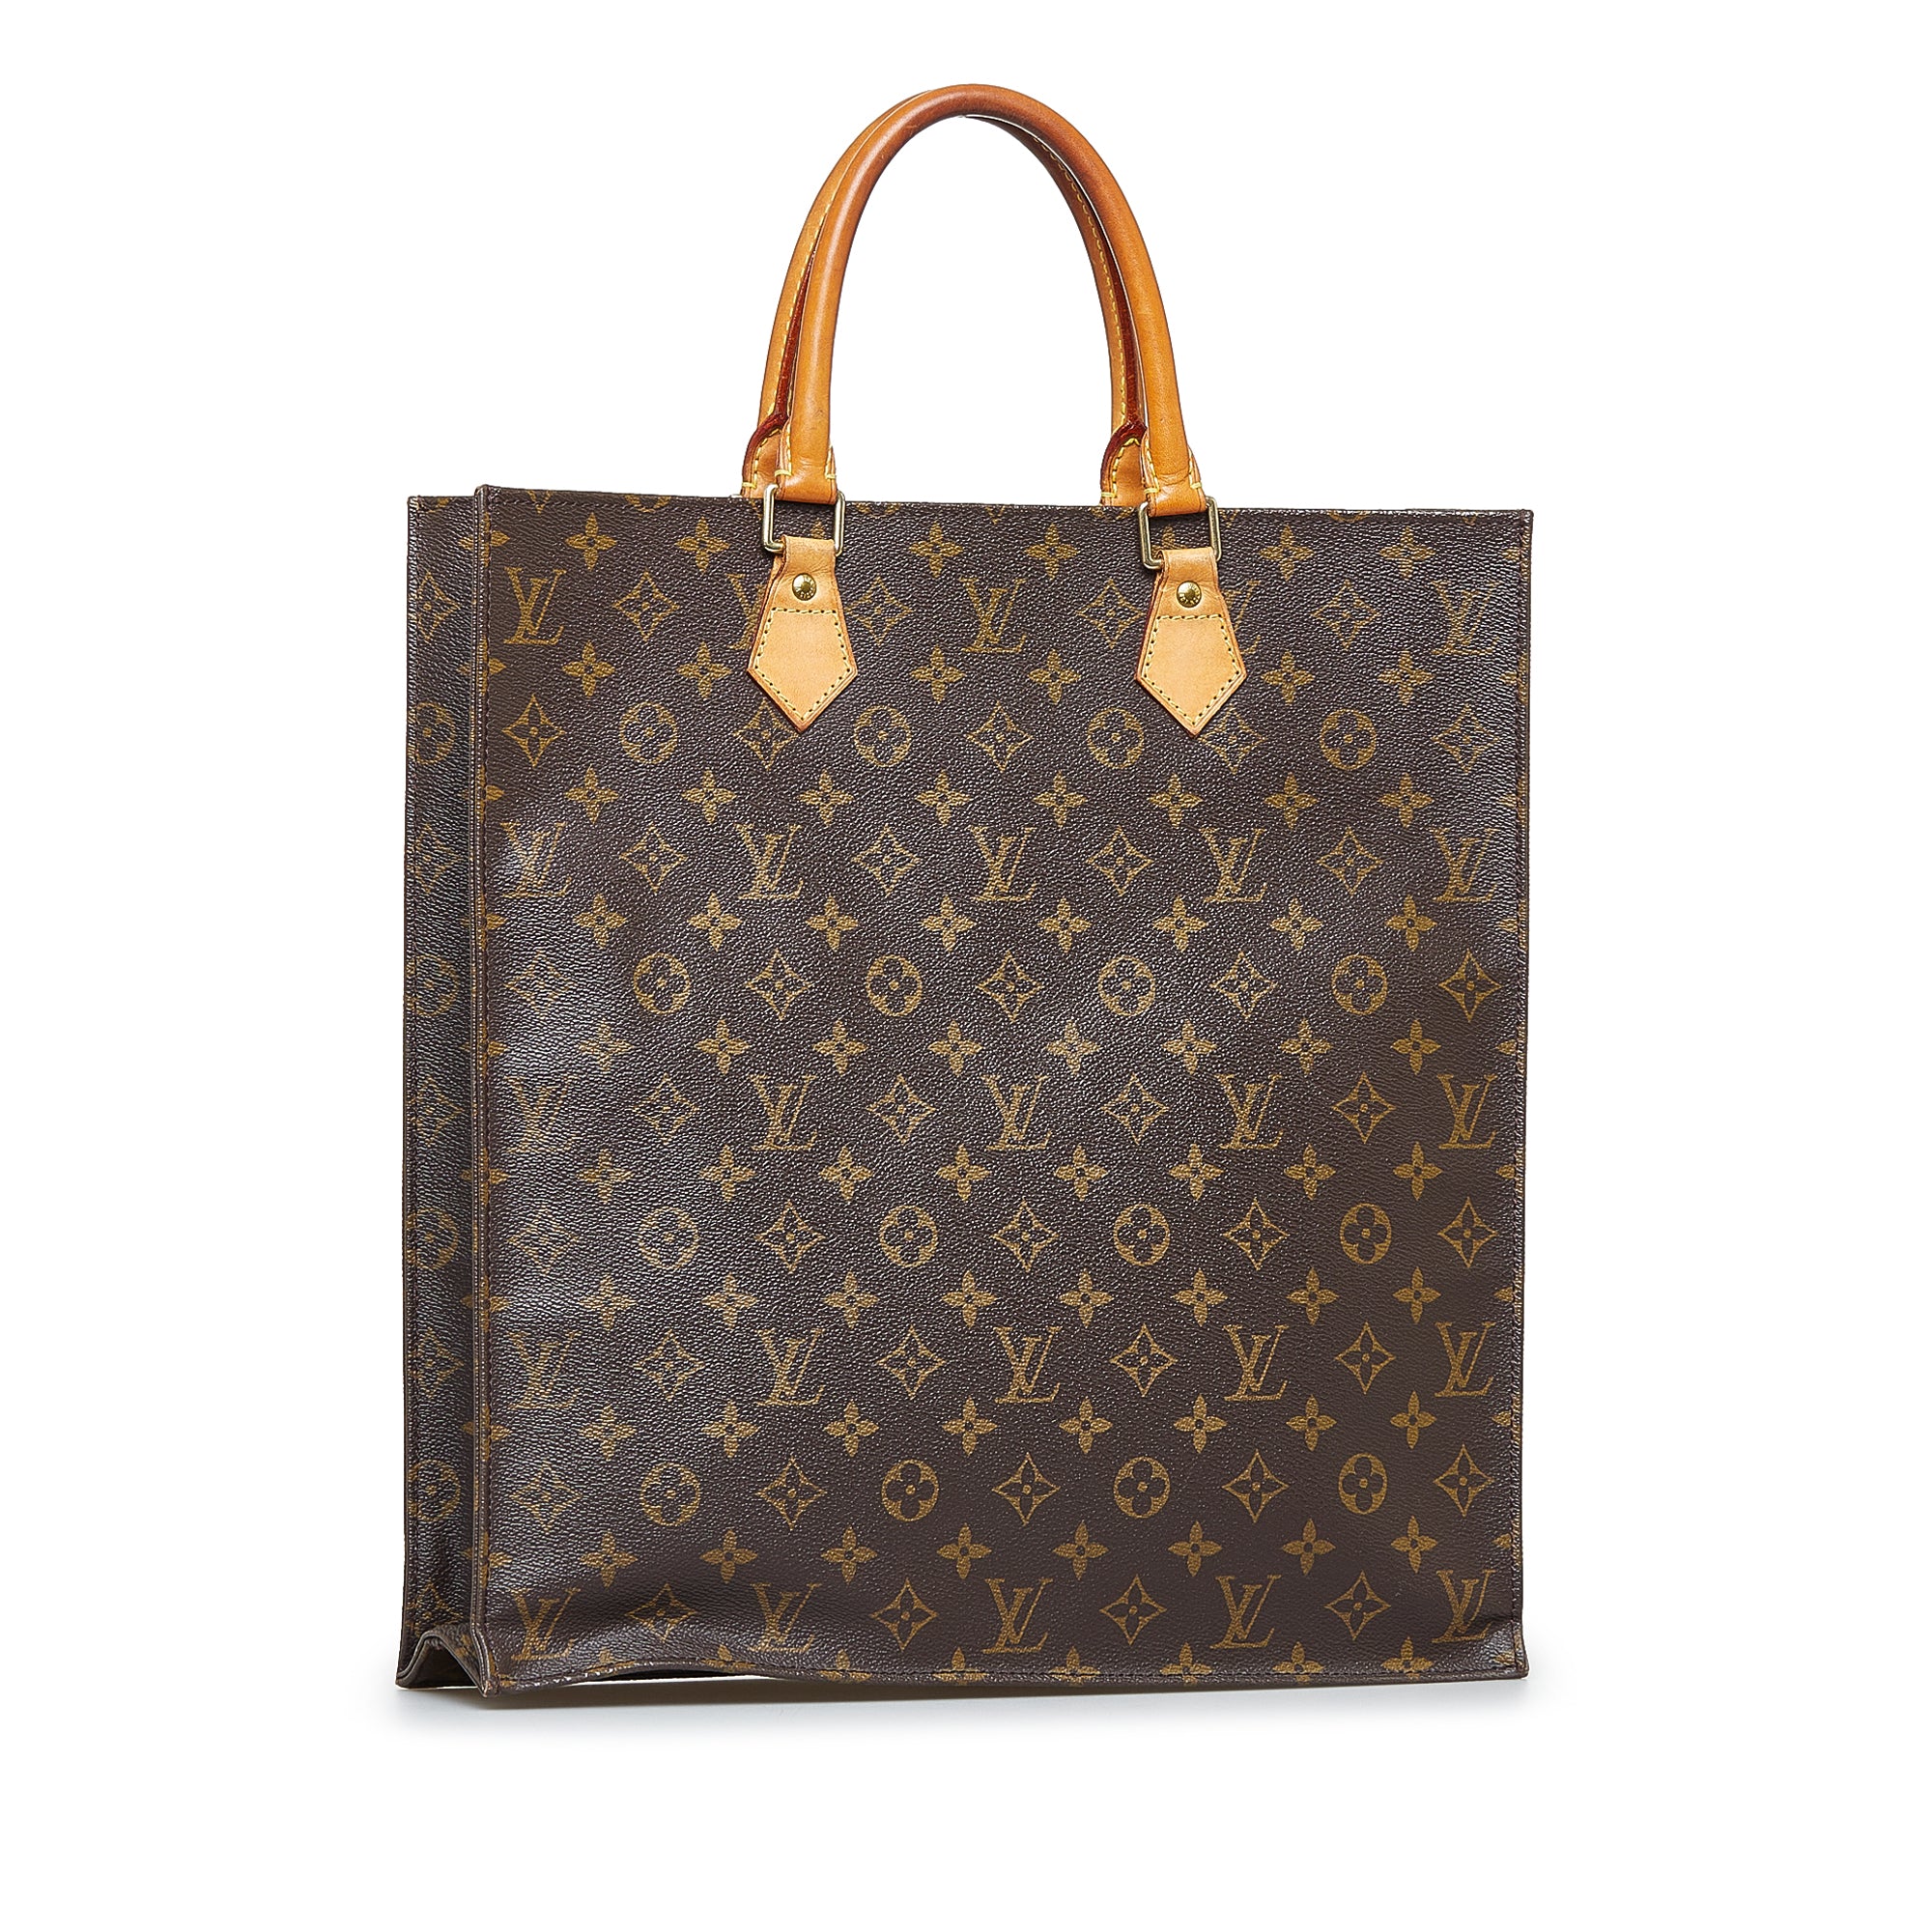 Louis Vuitton Sac Plat Shopping Bag and Brown Leather